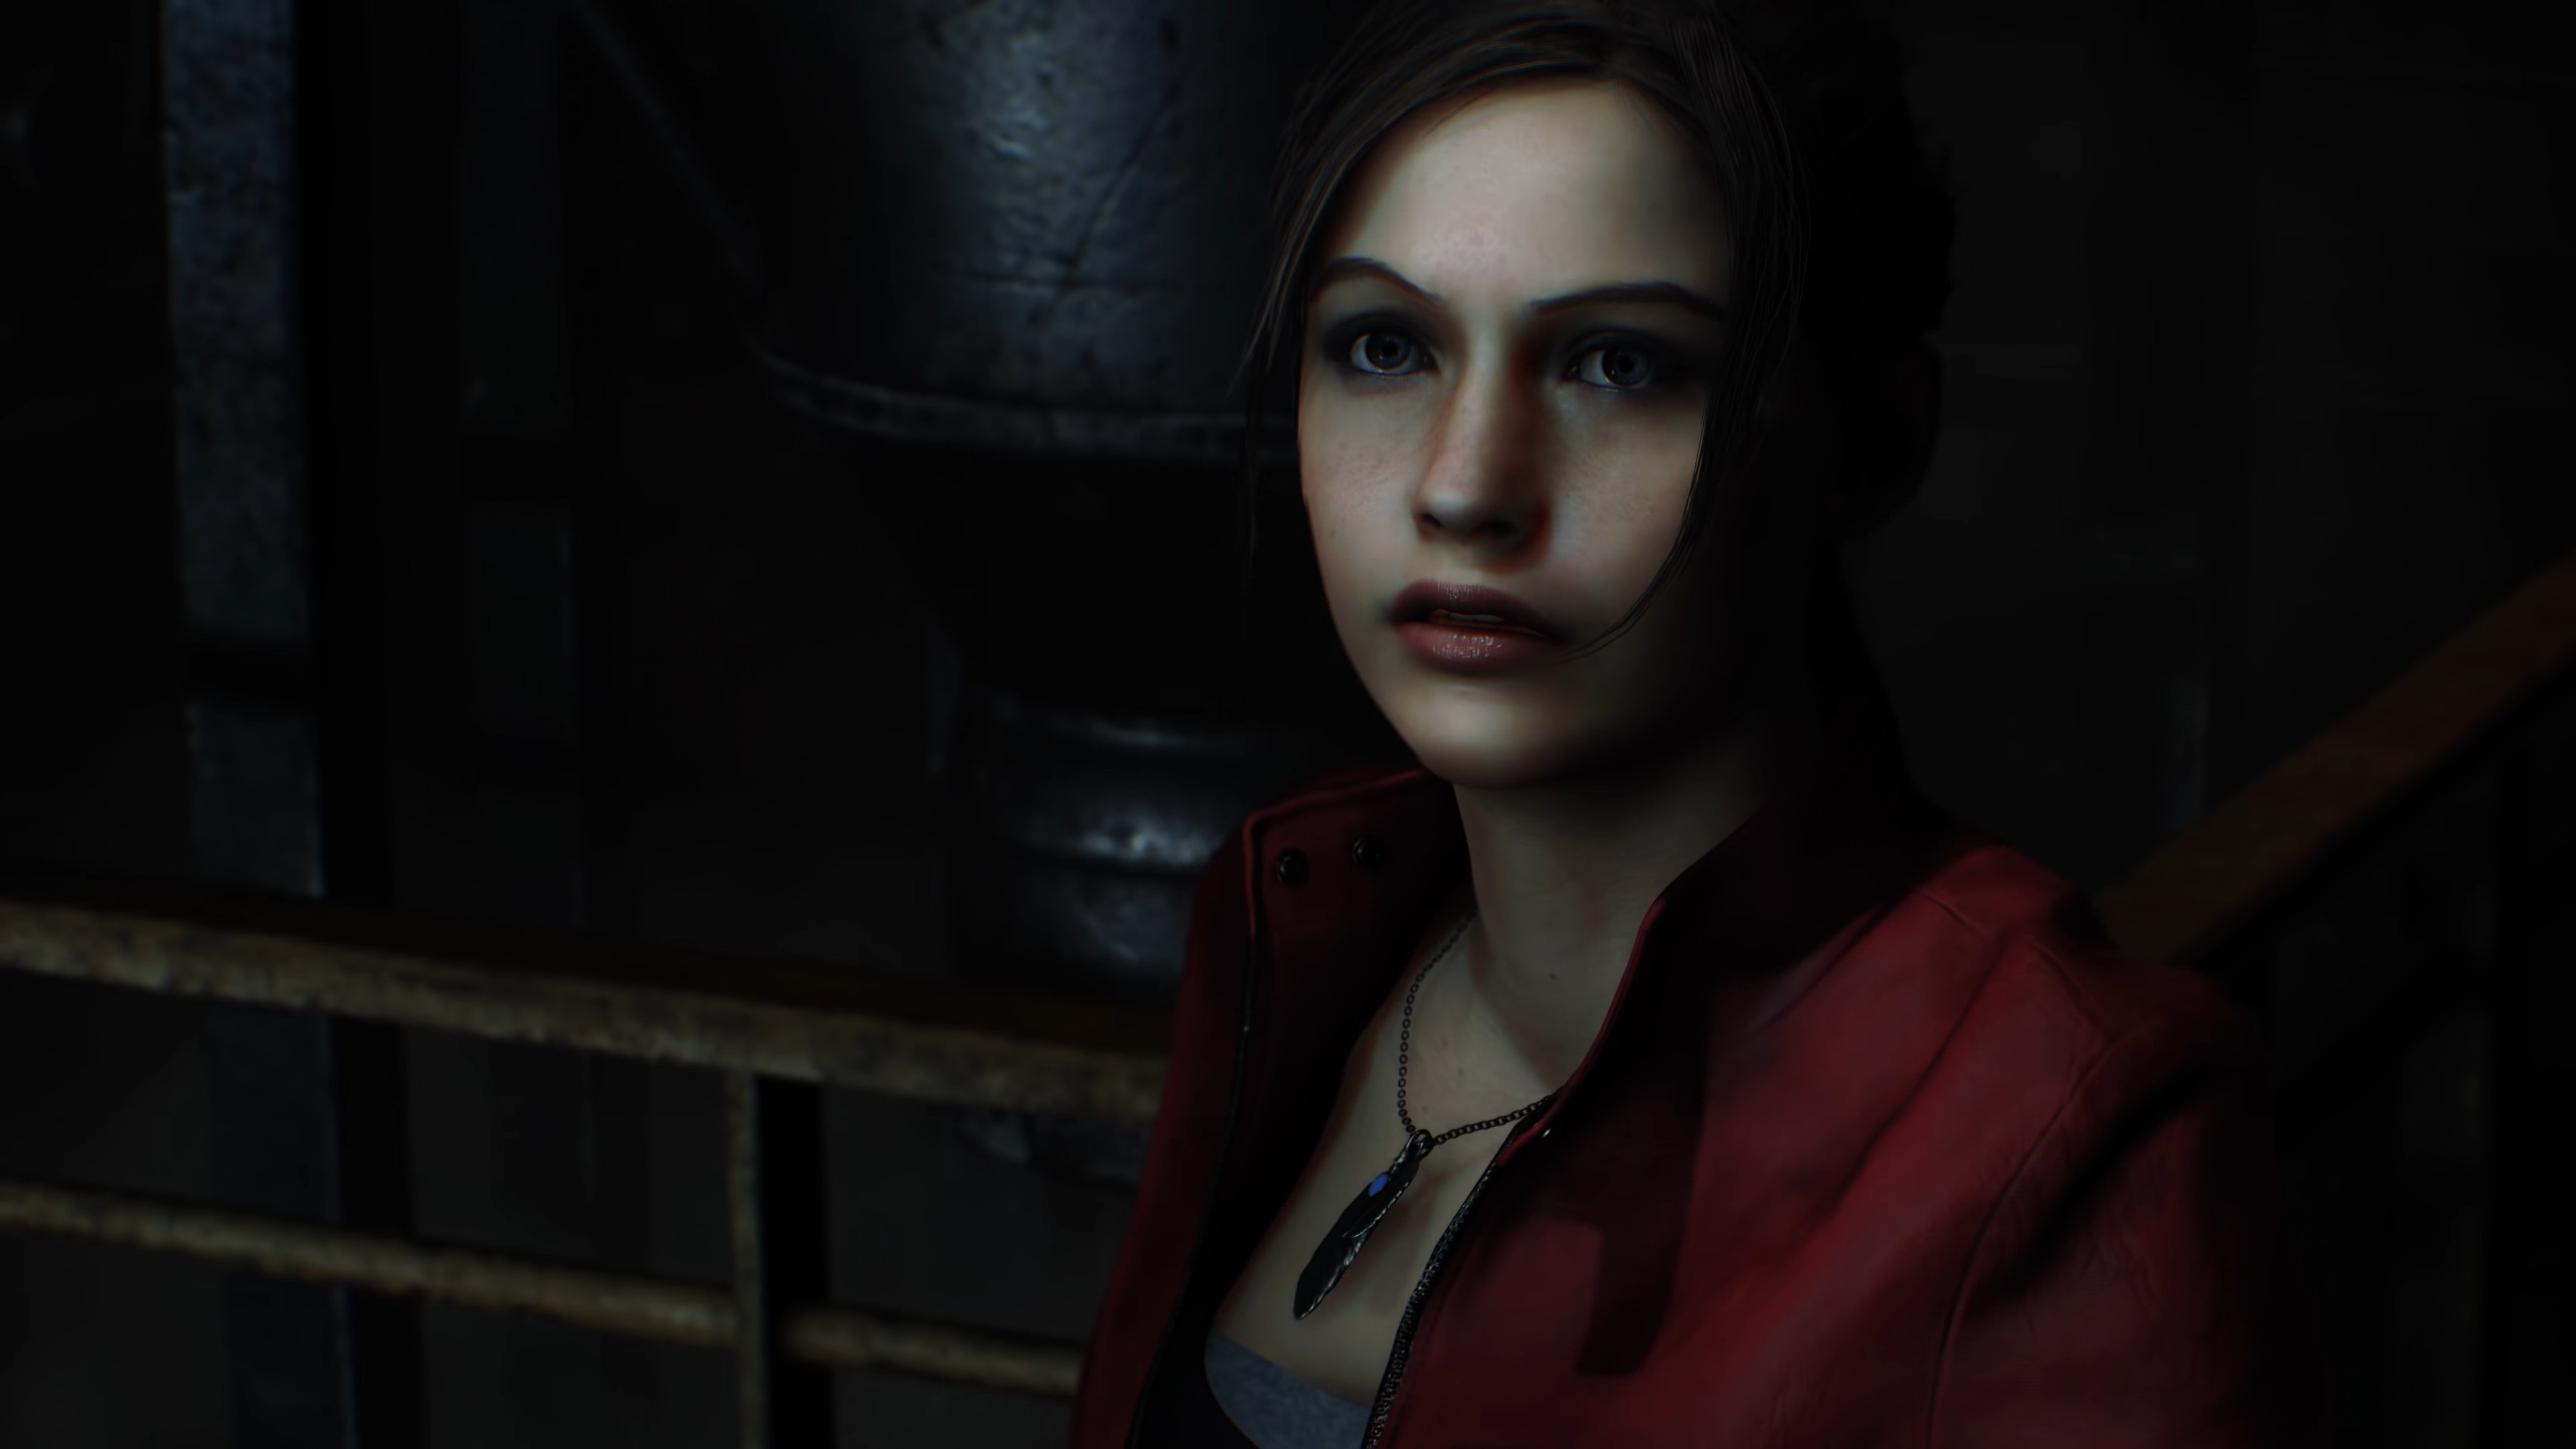 General 3840x2160 Resident Evil 2 video games Claire Redfield Leon Kennedy Capcom Racoon City Resident Evil face women video game characters